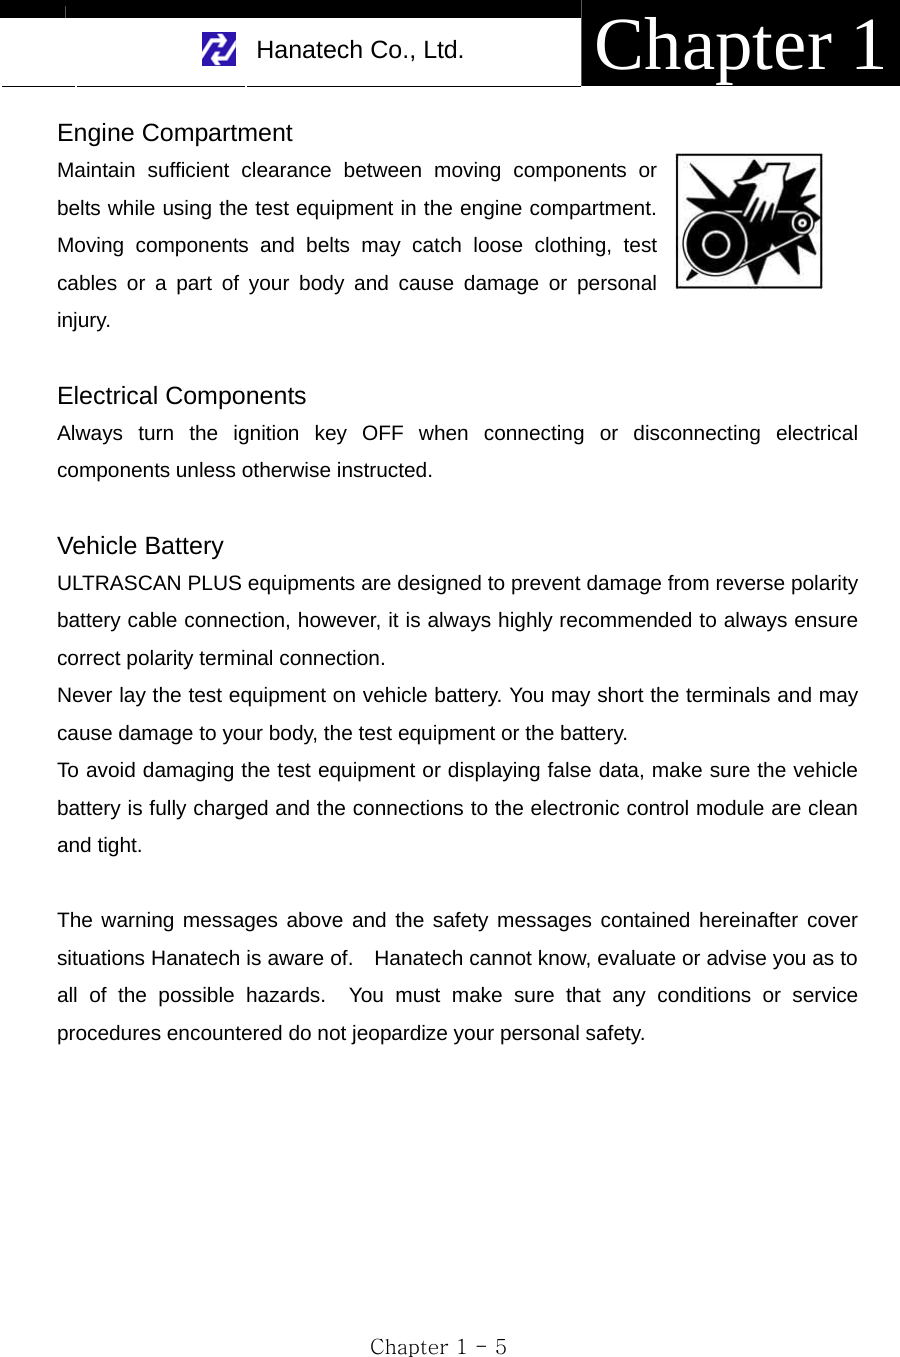     Hanatech Co., Ltd.  Chapter 1 Chapter 1 - 5 Engine Compartment Maintain sufficient clearance between moving components or belts while using the test equipment in the engine compartment.  Moving components and belts may catch loose clothing, test cables or a part of your body and cause damage or personal injury.  Electrical Components Always turn the ignition key OFF when connecting or disconnecting electrical components unless otherwise instructed.  Vehicle Battery ULTRASCAN PLUS equipments are designed to prevent damage from reverse polarity battery cable connection, however, it is always highly recommended to always ensure correct polarity terminal connection.     Never lay the test equipment on vehicle battery. You may short the terminals and may cause damage to your body, the test equipment or the battery. To avoid damaging the test equipment or displaying false data, make sure the vehicle battery is fully charged and the connections to the electronic control module are clean and tight.  The warning messages above and the safety messages contained hereinafter cover situations Hanatech is aware of.    Hanatech cannot know, evaluate or advise you as to all of the possible hazards.  You must make sure that any conditions or service procedures encountered do not jeopardize your personal safety.        